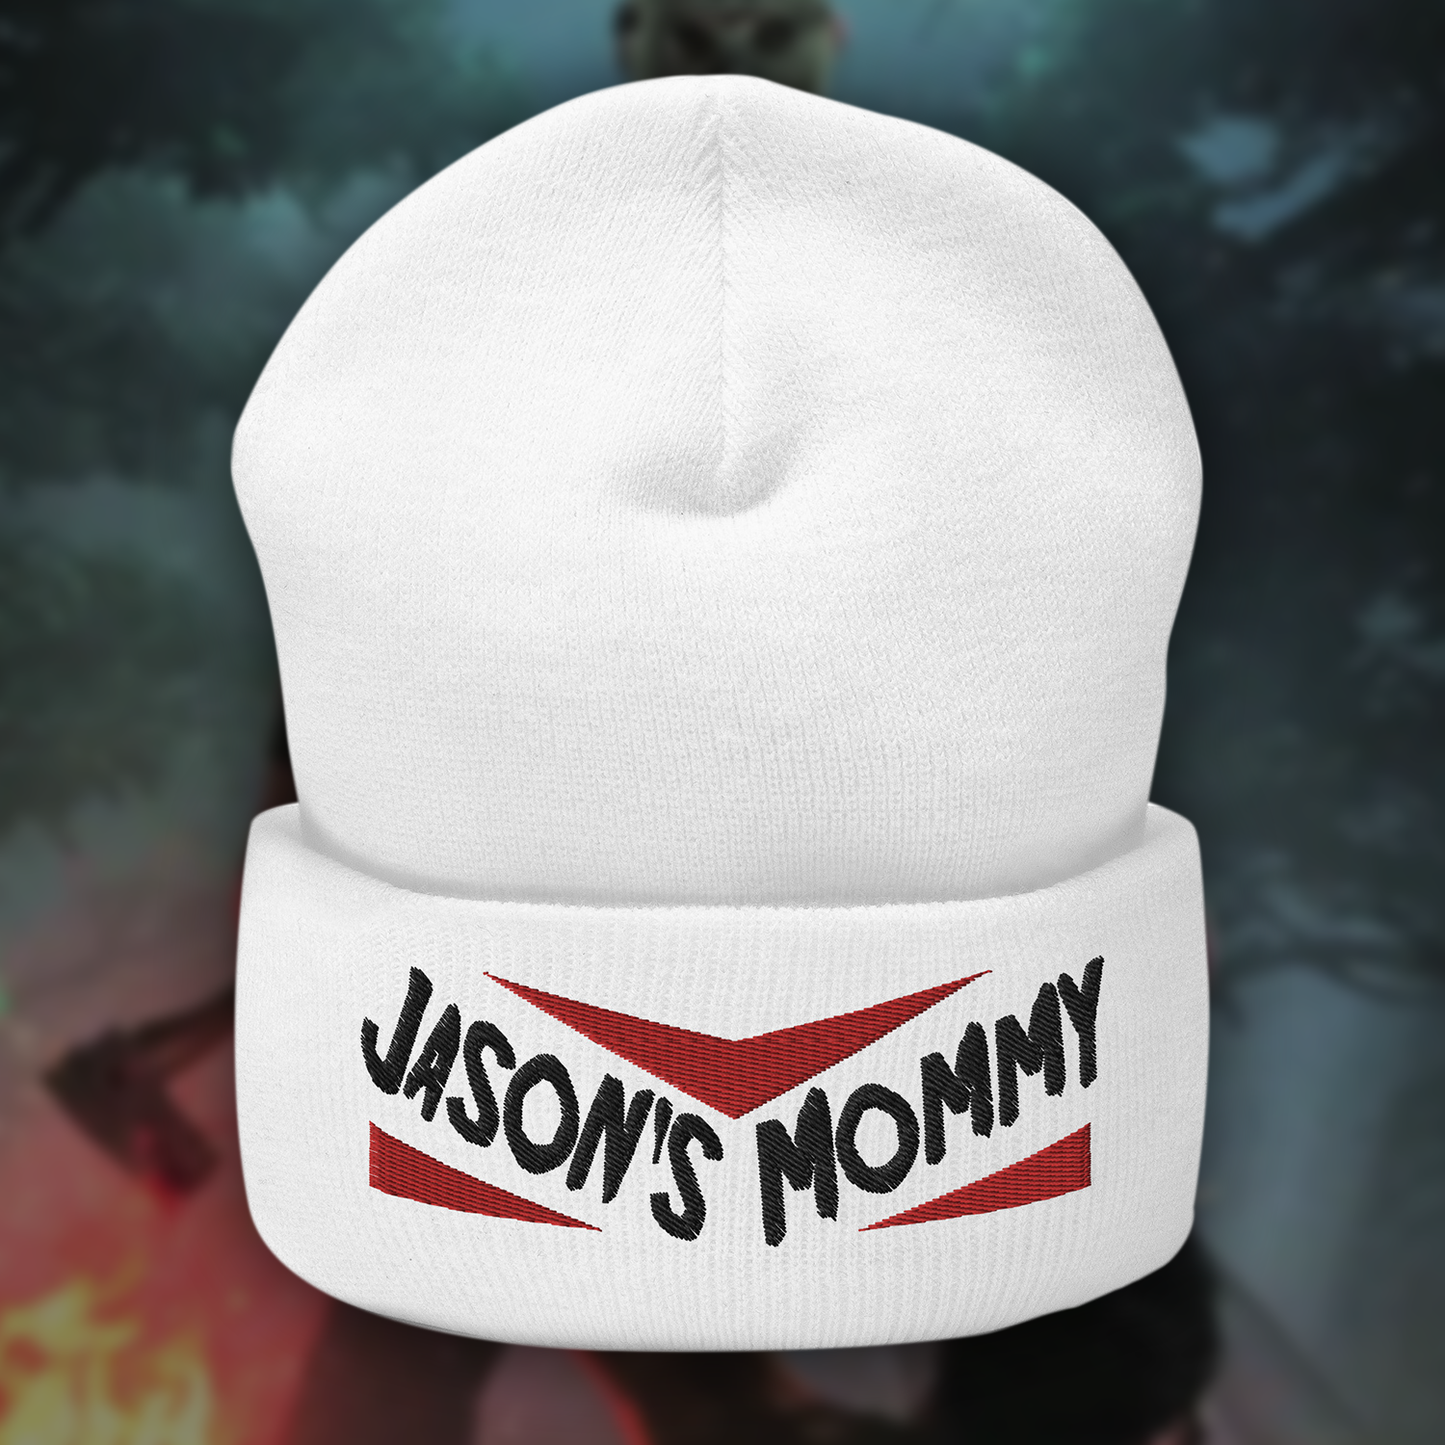 Jason's Mommy Embroidered Beanie